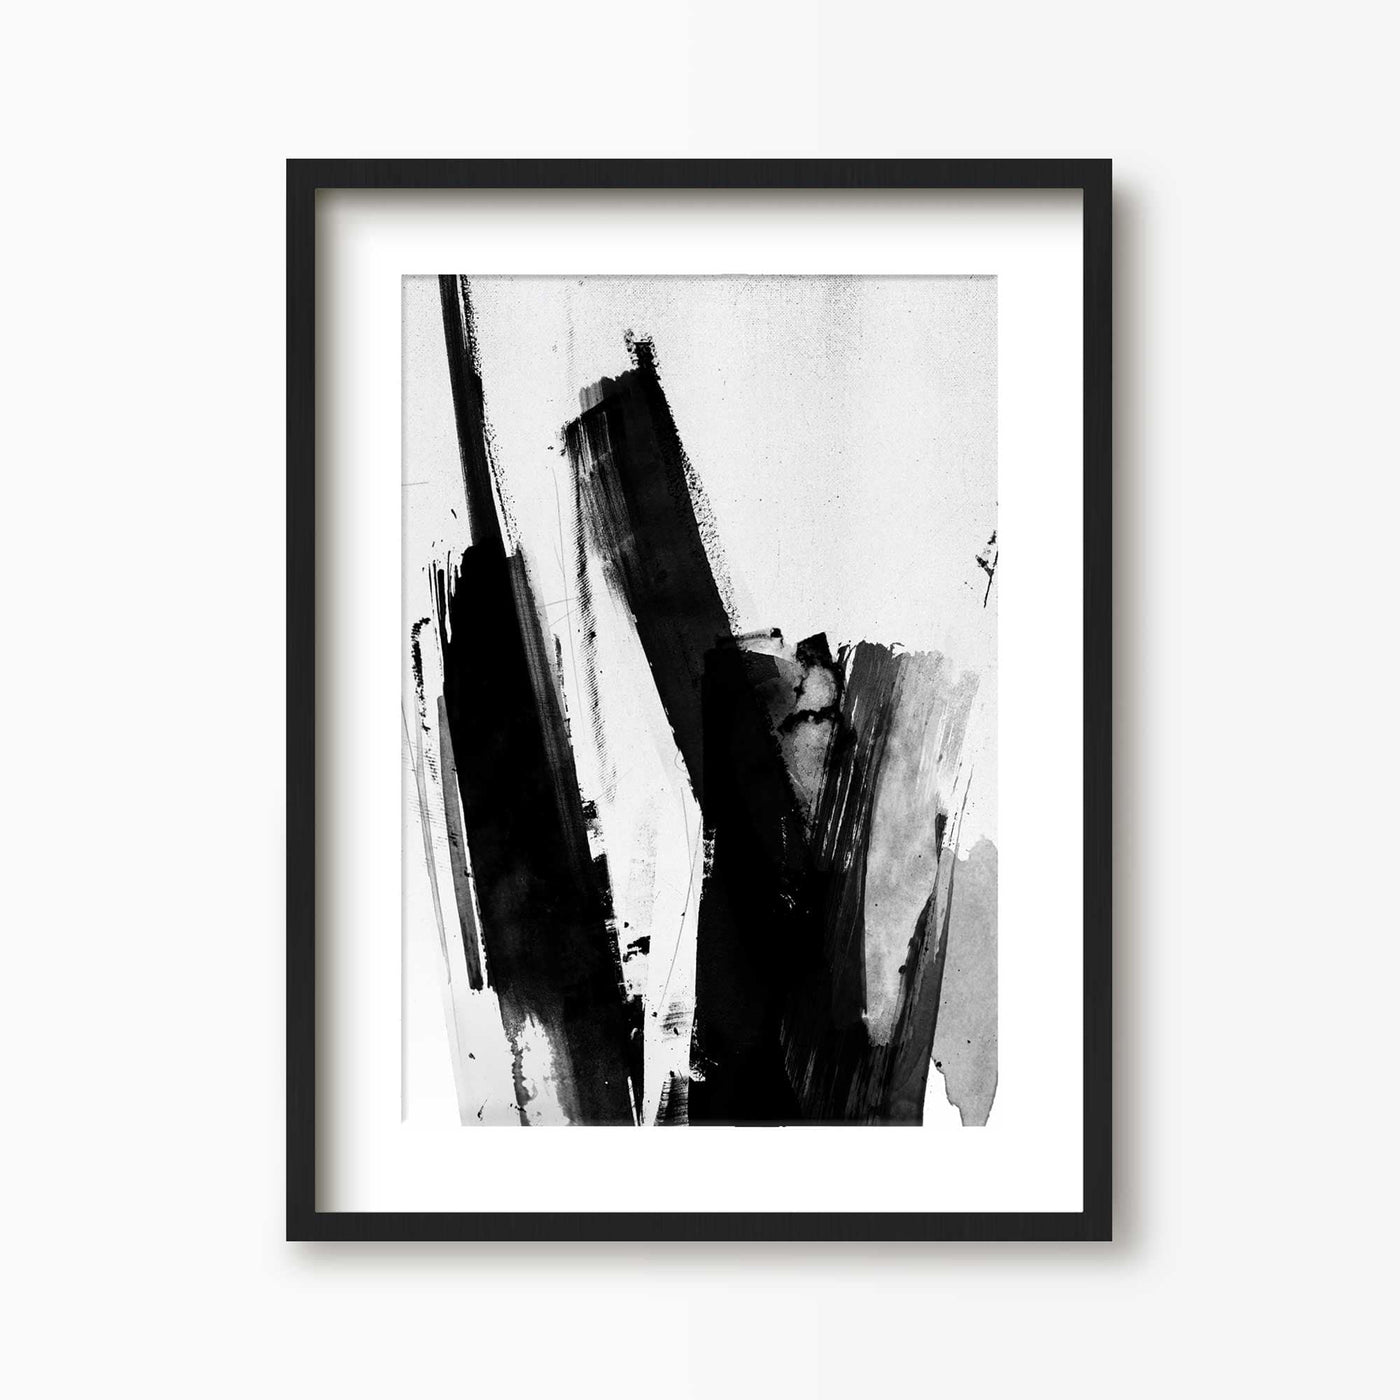 Green Lili 30x40cm / Black with mount Black and White Abstract Scribble Painting 2